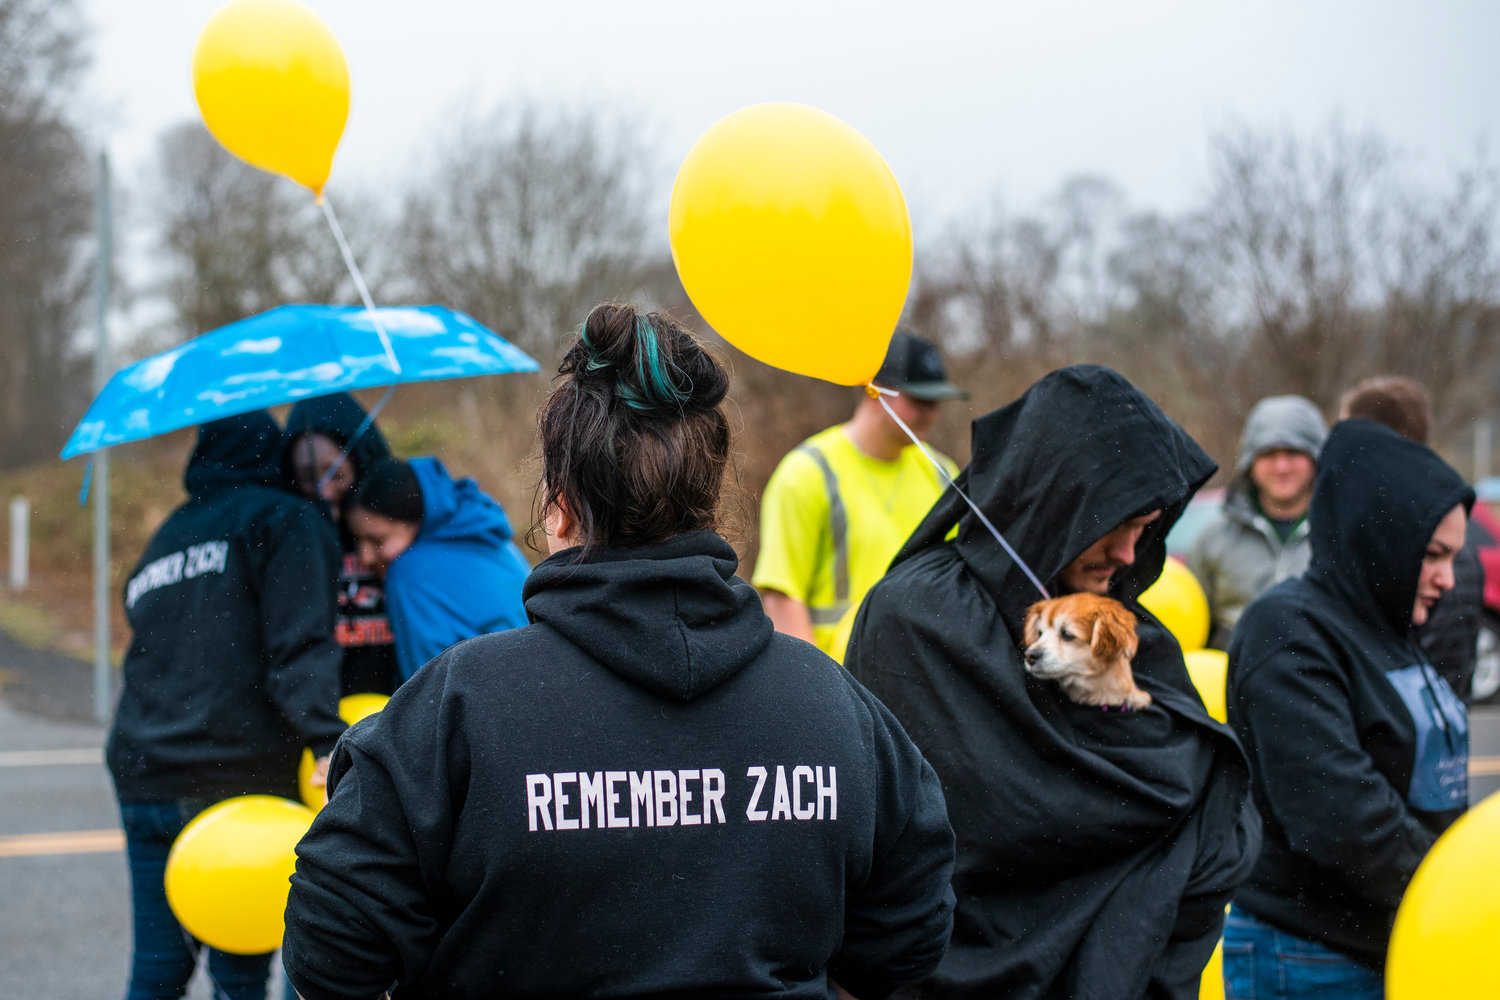 Family and friends gather for a balloon release to remember Zachary Rager during an event marking one year since his life was lost.